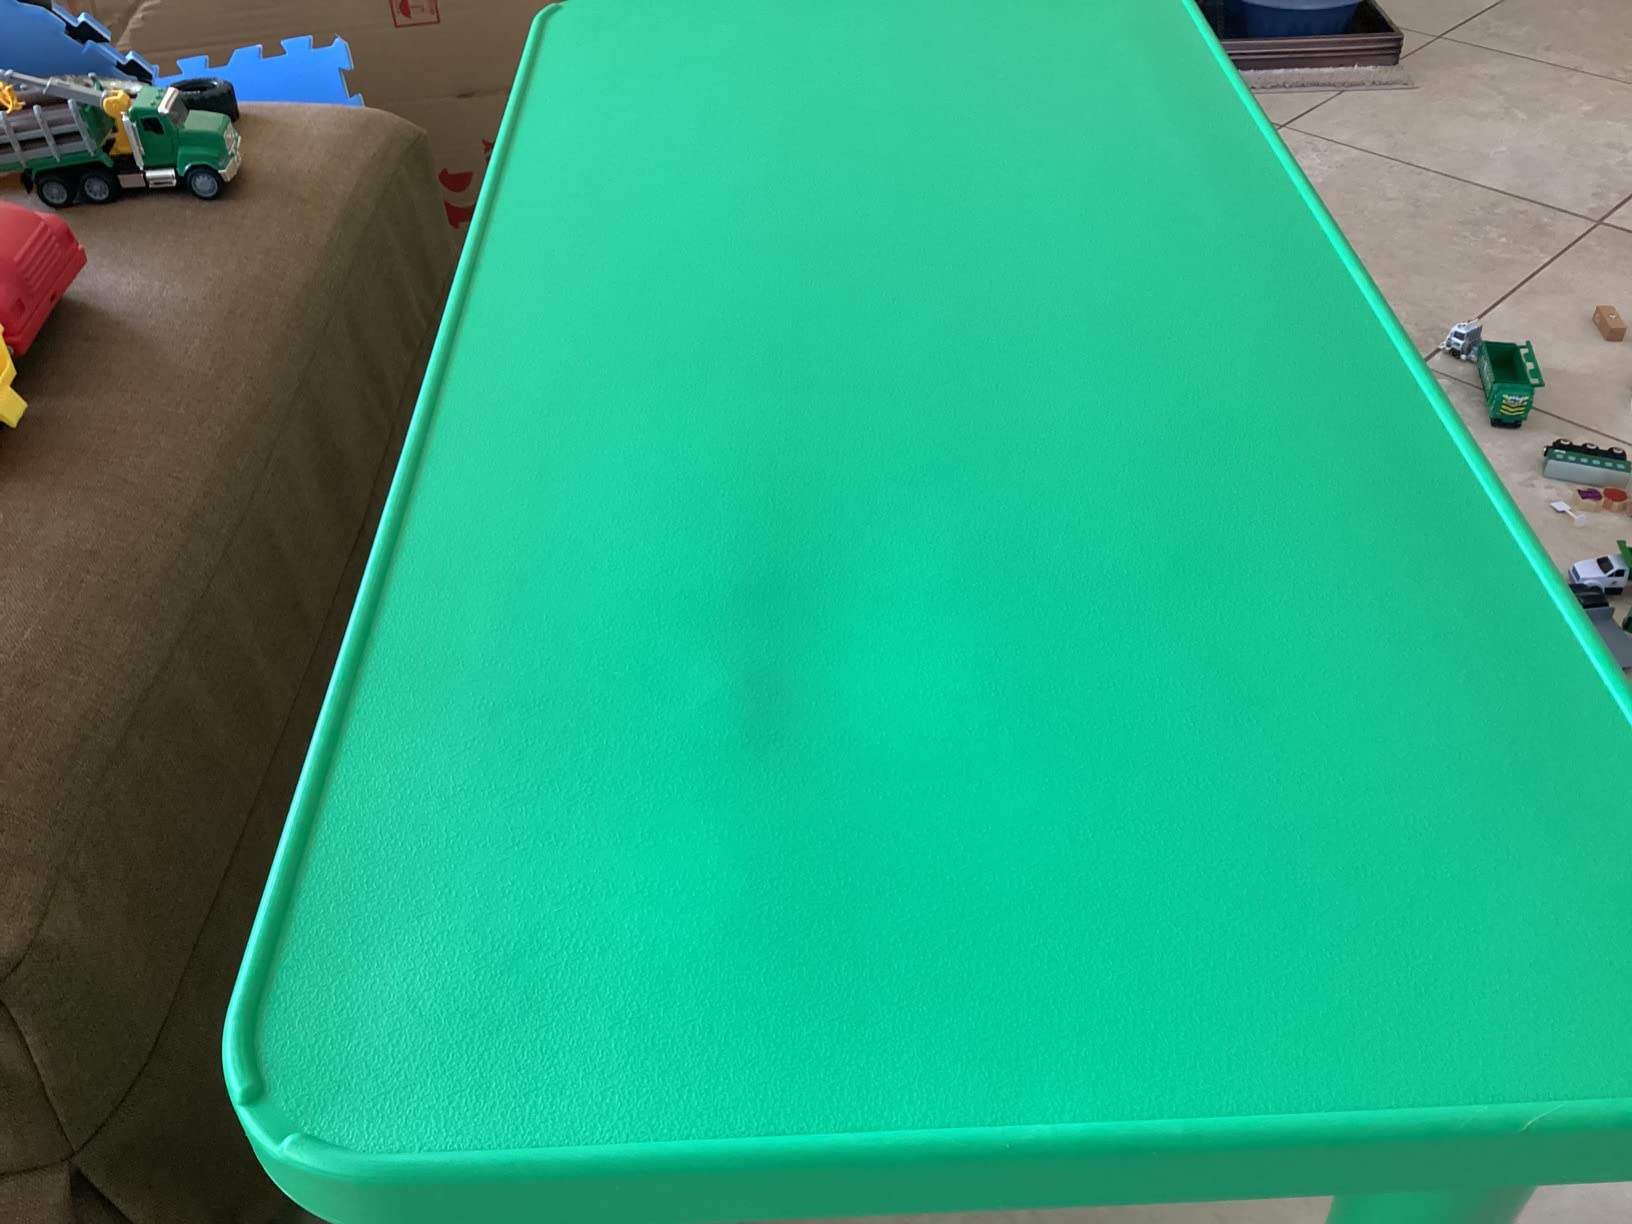 Great table for toddler